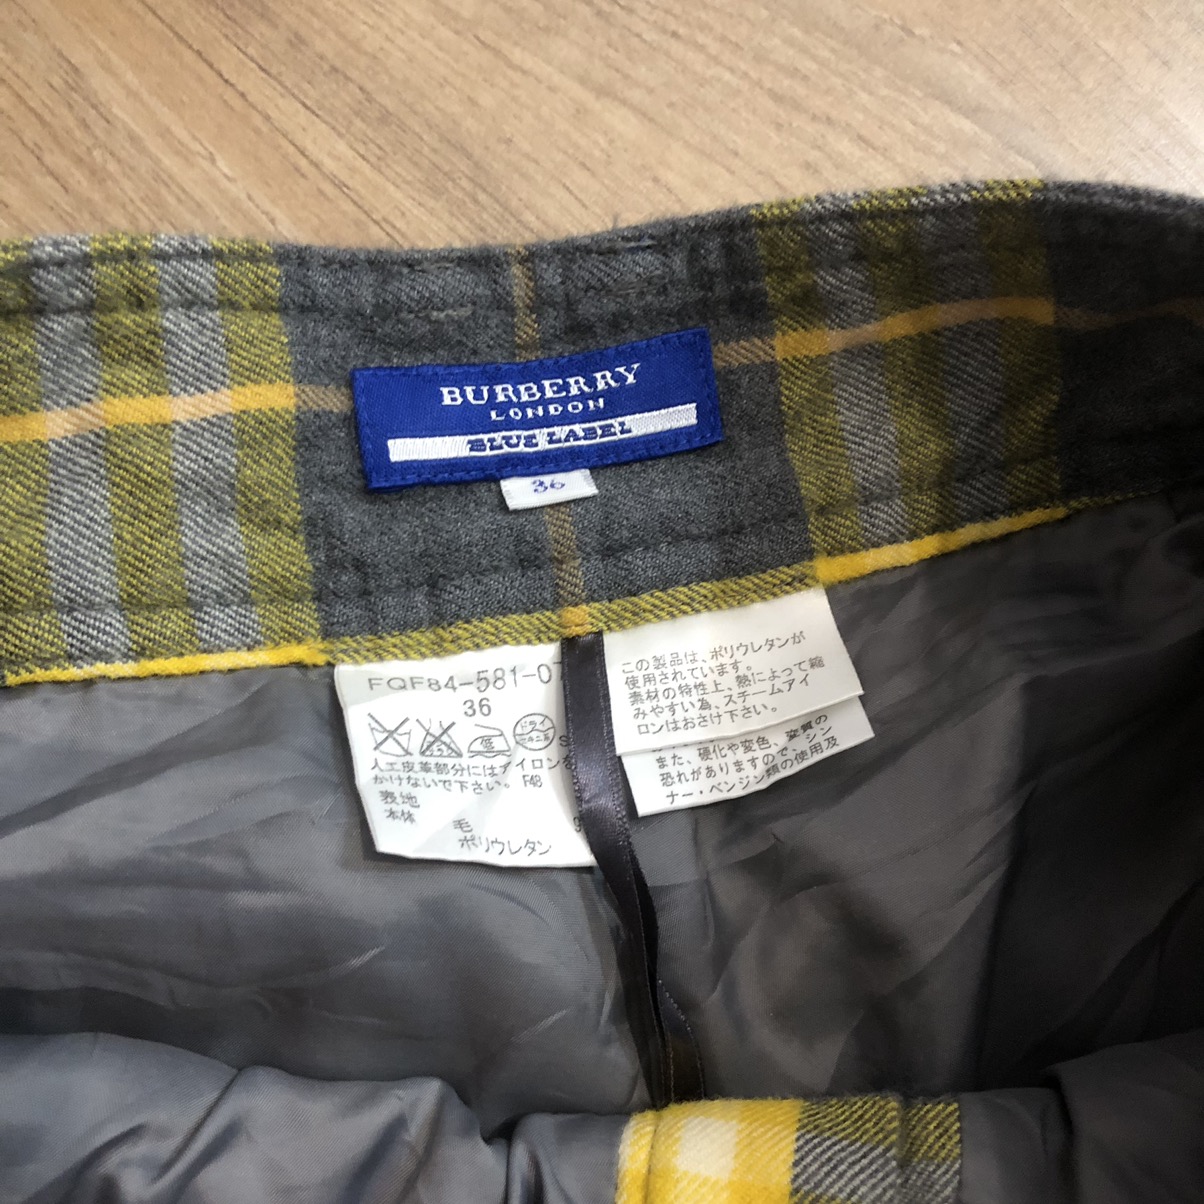 Vintage - Vintage Burberry Blue Label Checkered Wool Shorts - 6